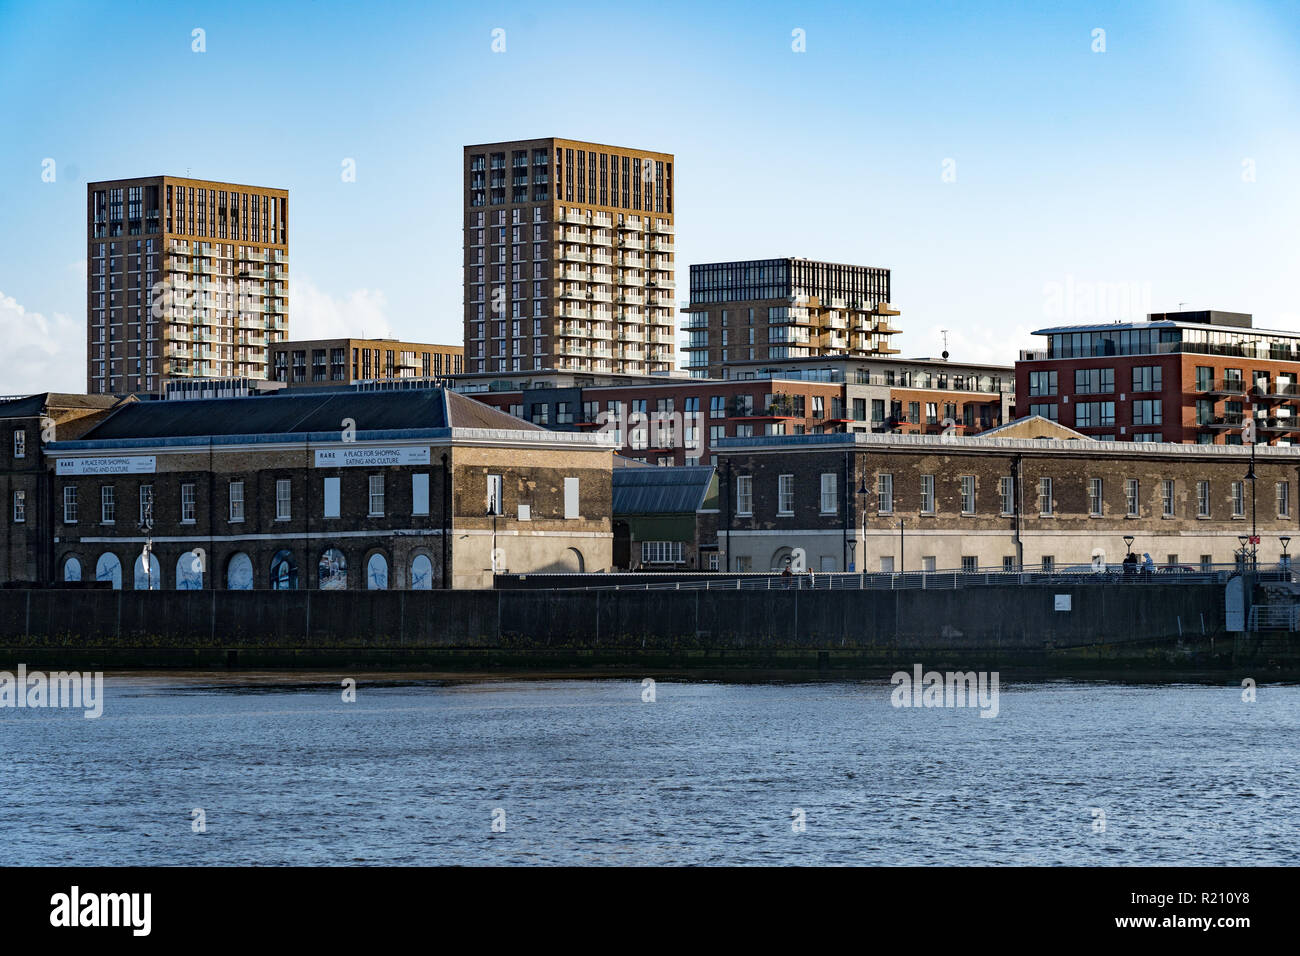 The Woolwich Arsenal. From the Open City Thames Architecture Tour East. Photo date: Saturday, November 10, 2018. Photo: Roger Garfield/Alamy Stock Photo